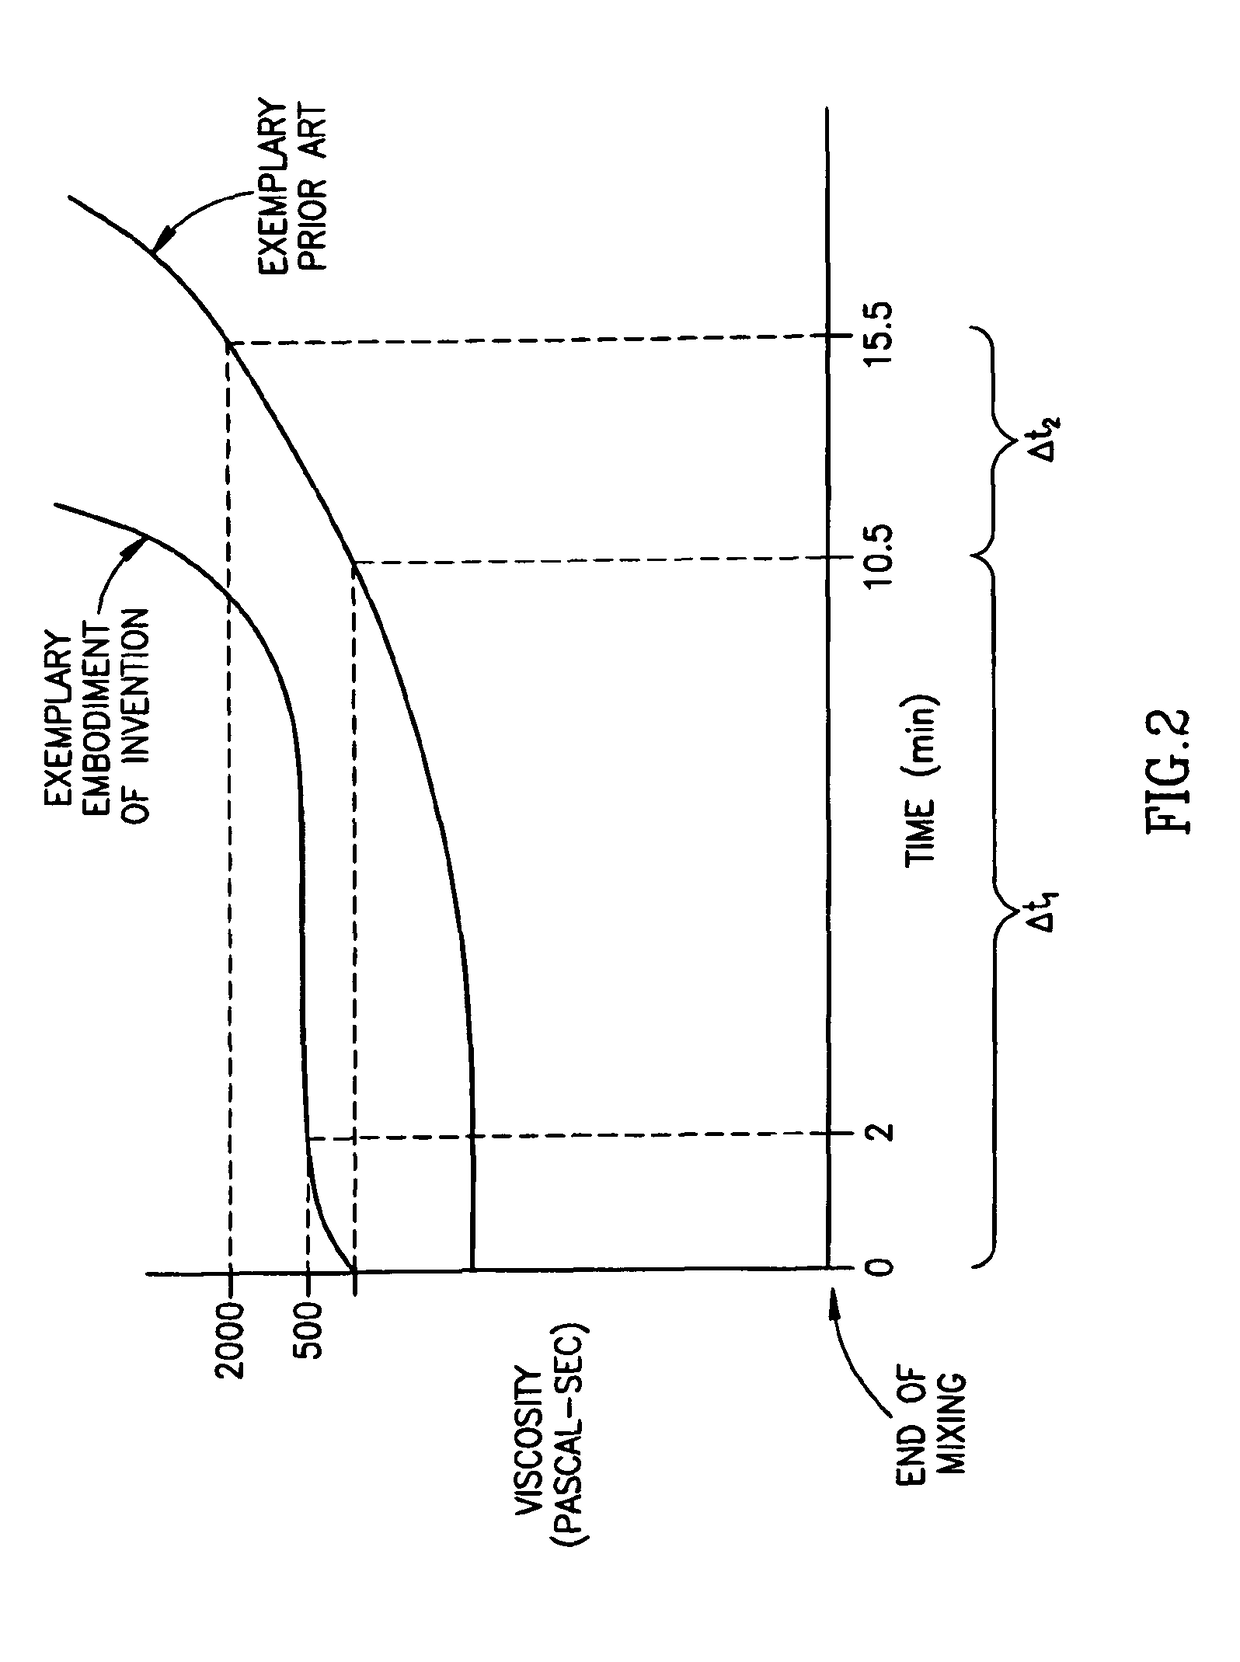 Bone cement and methods of use thereof